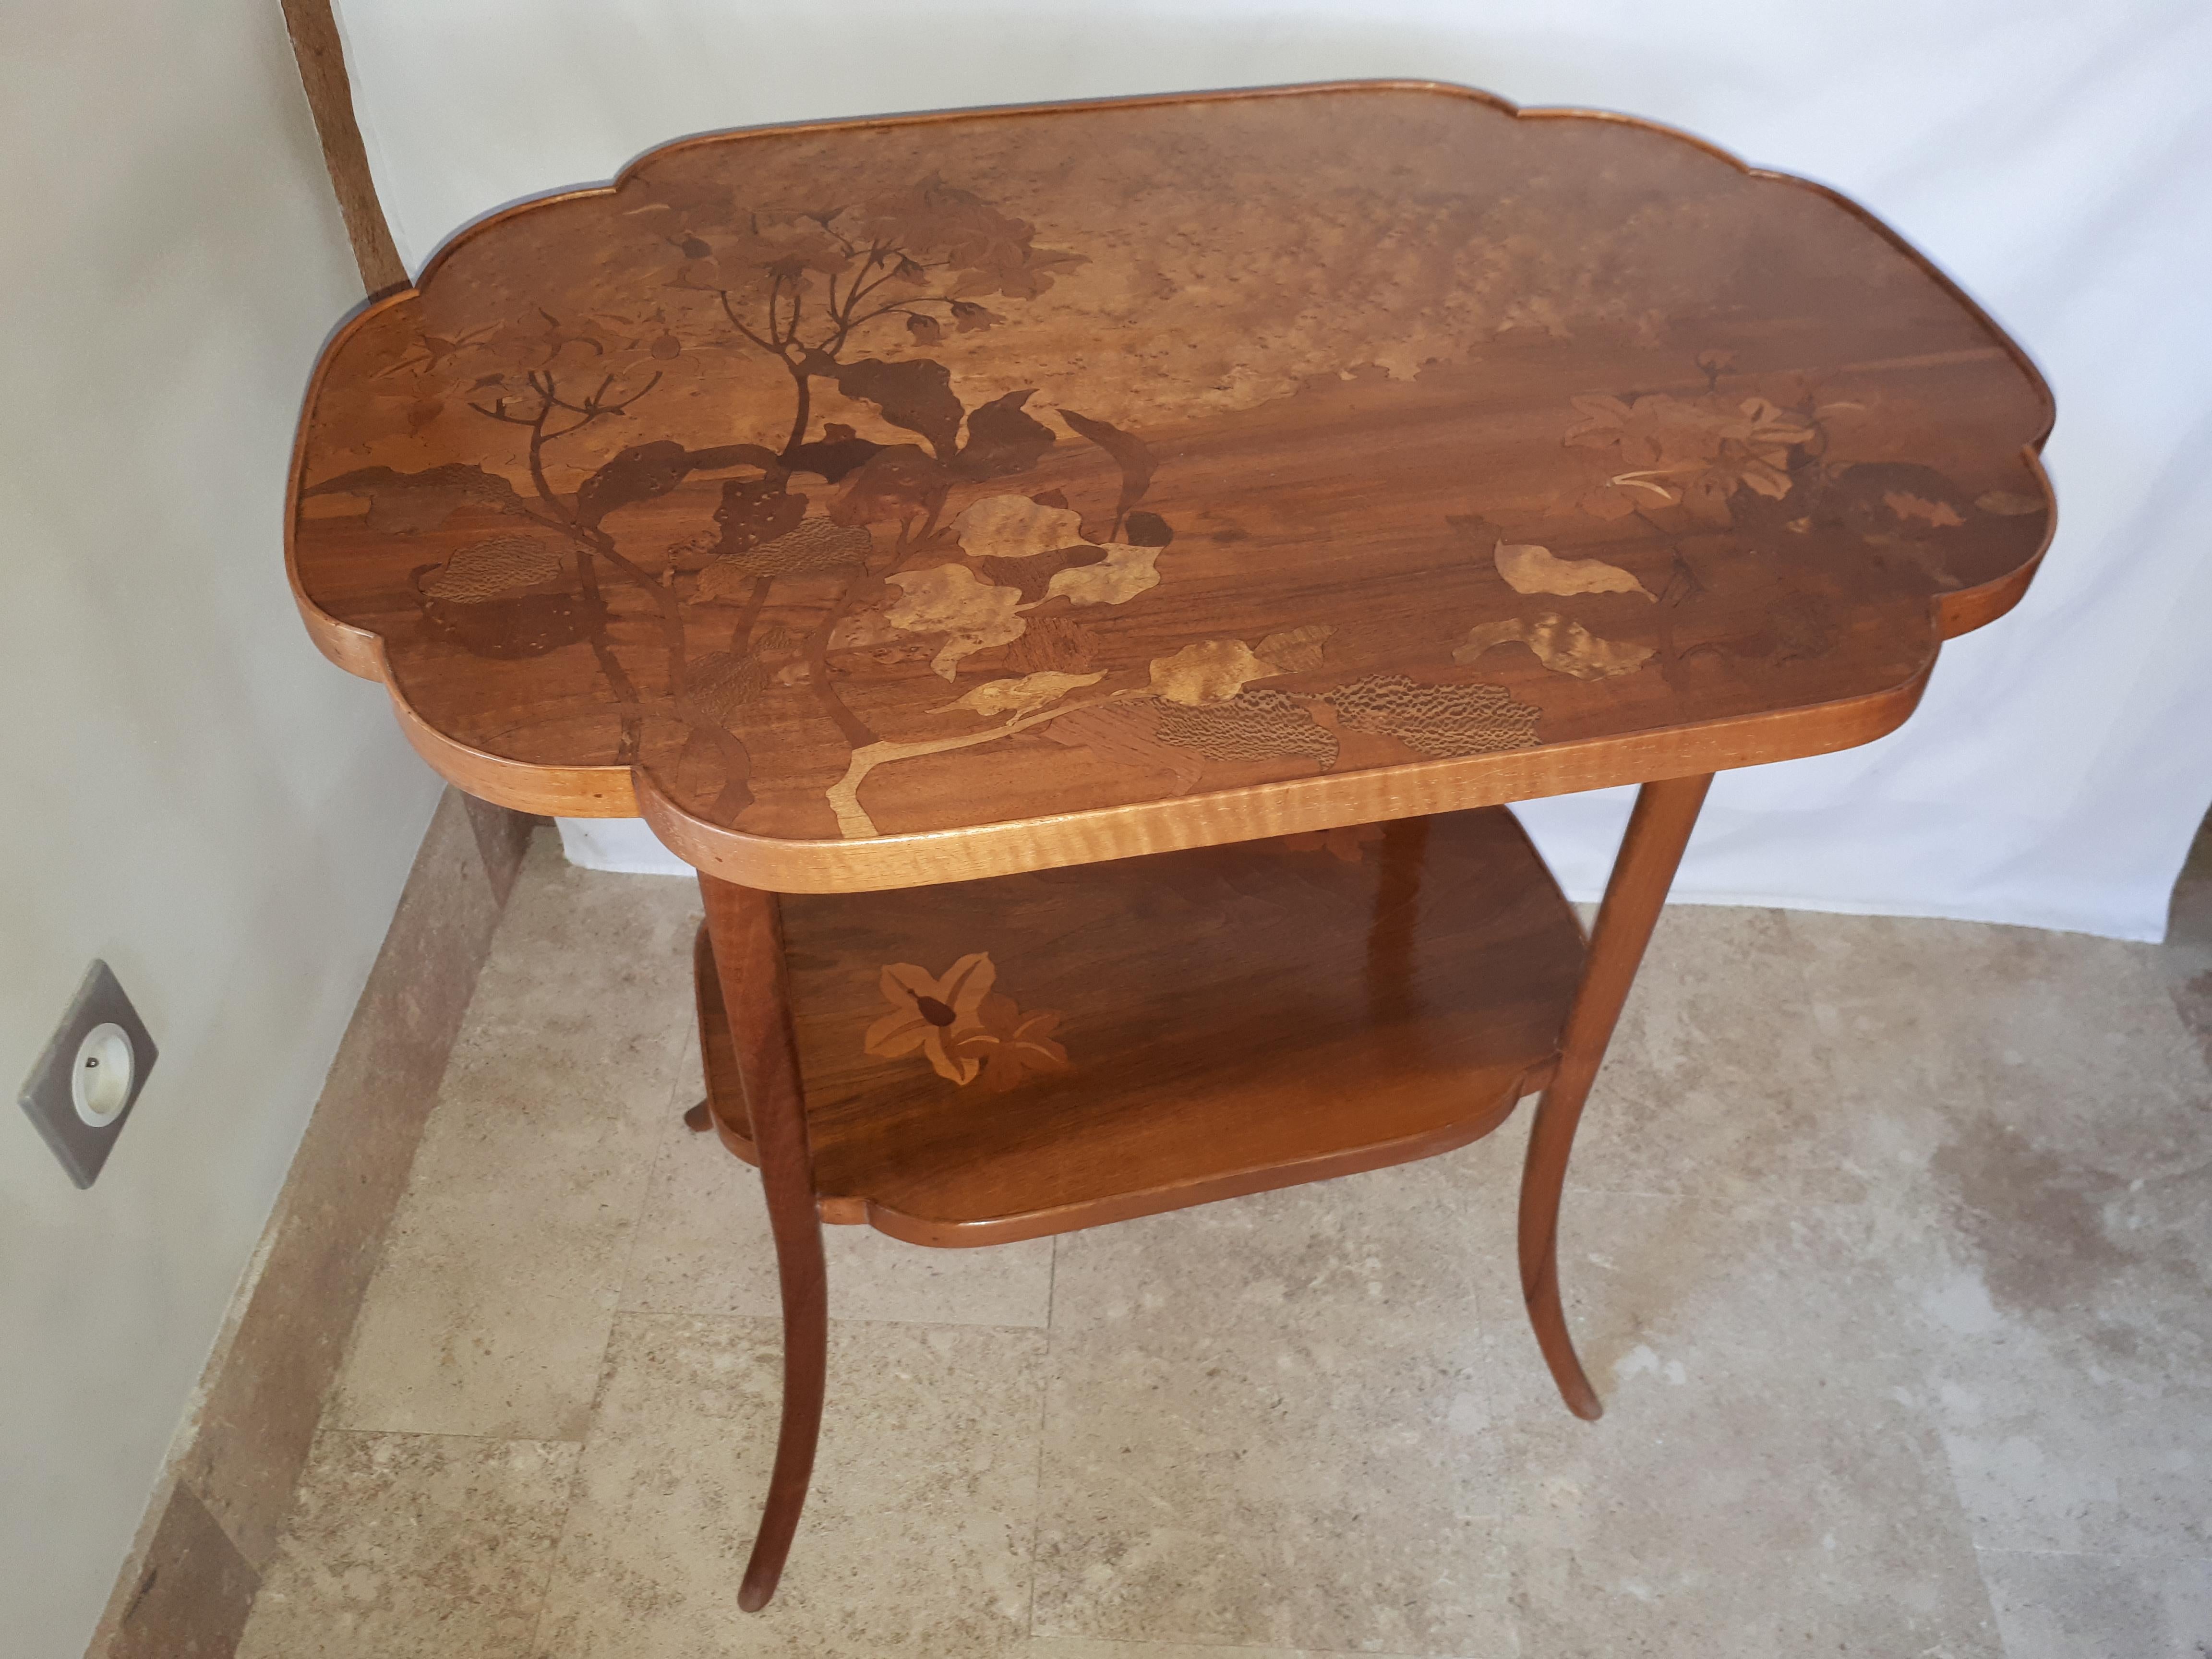 Gallé Art Nouveau Table With Hellebore Decor In Good Condition For Sale In Saverne, Grand Est